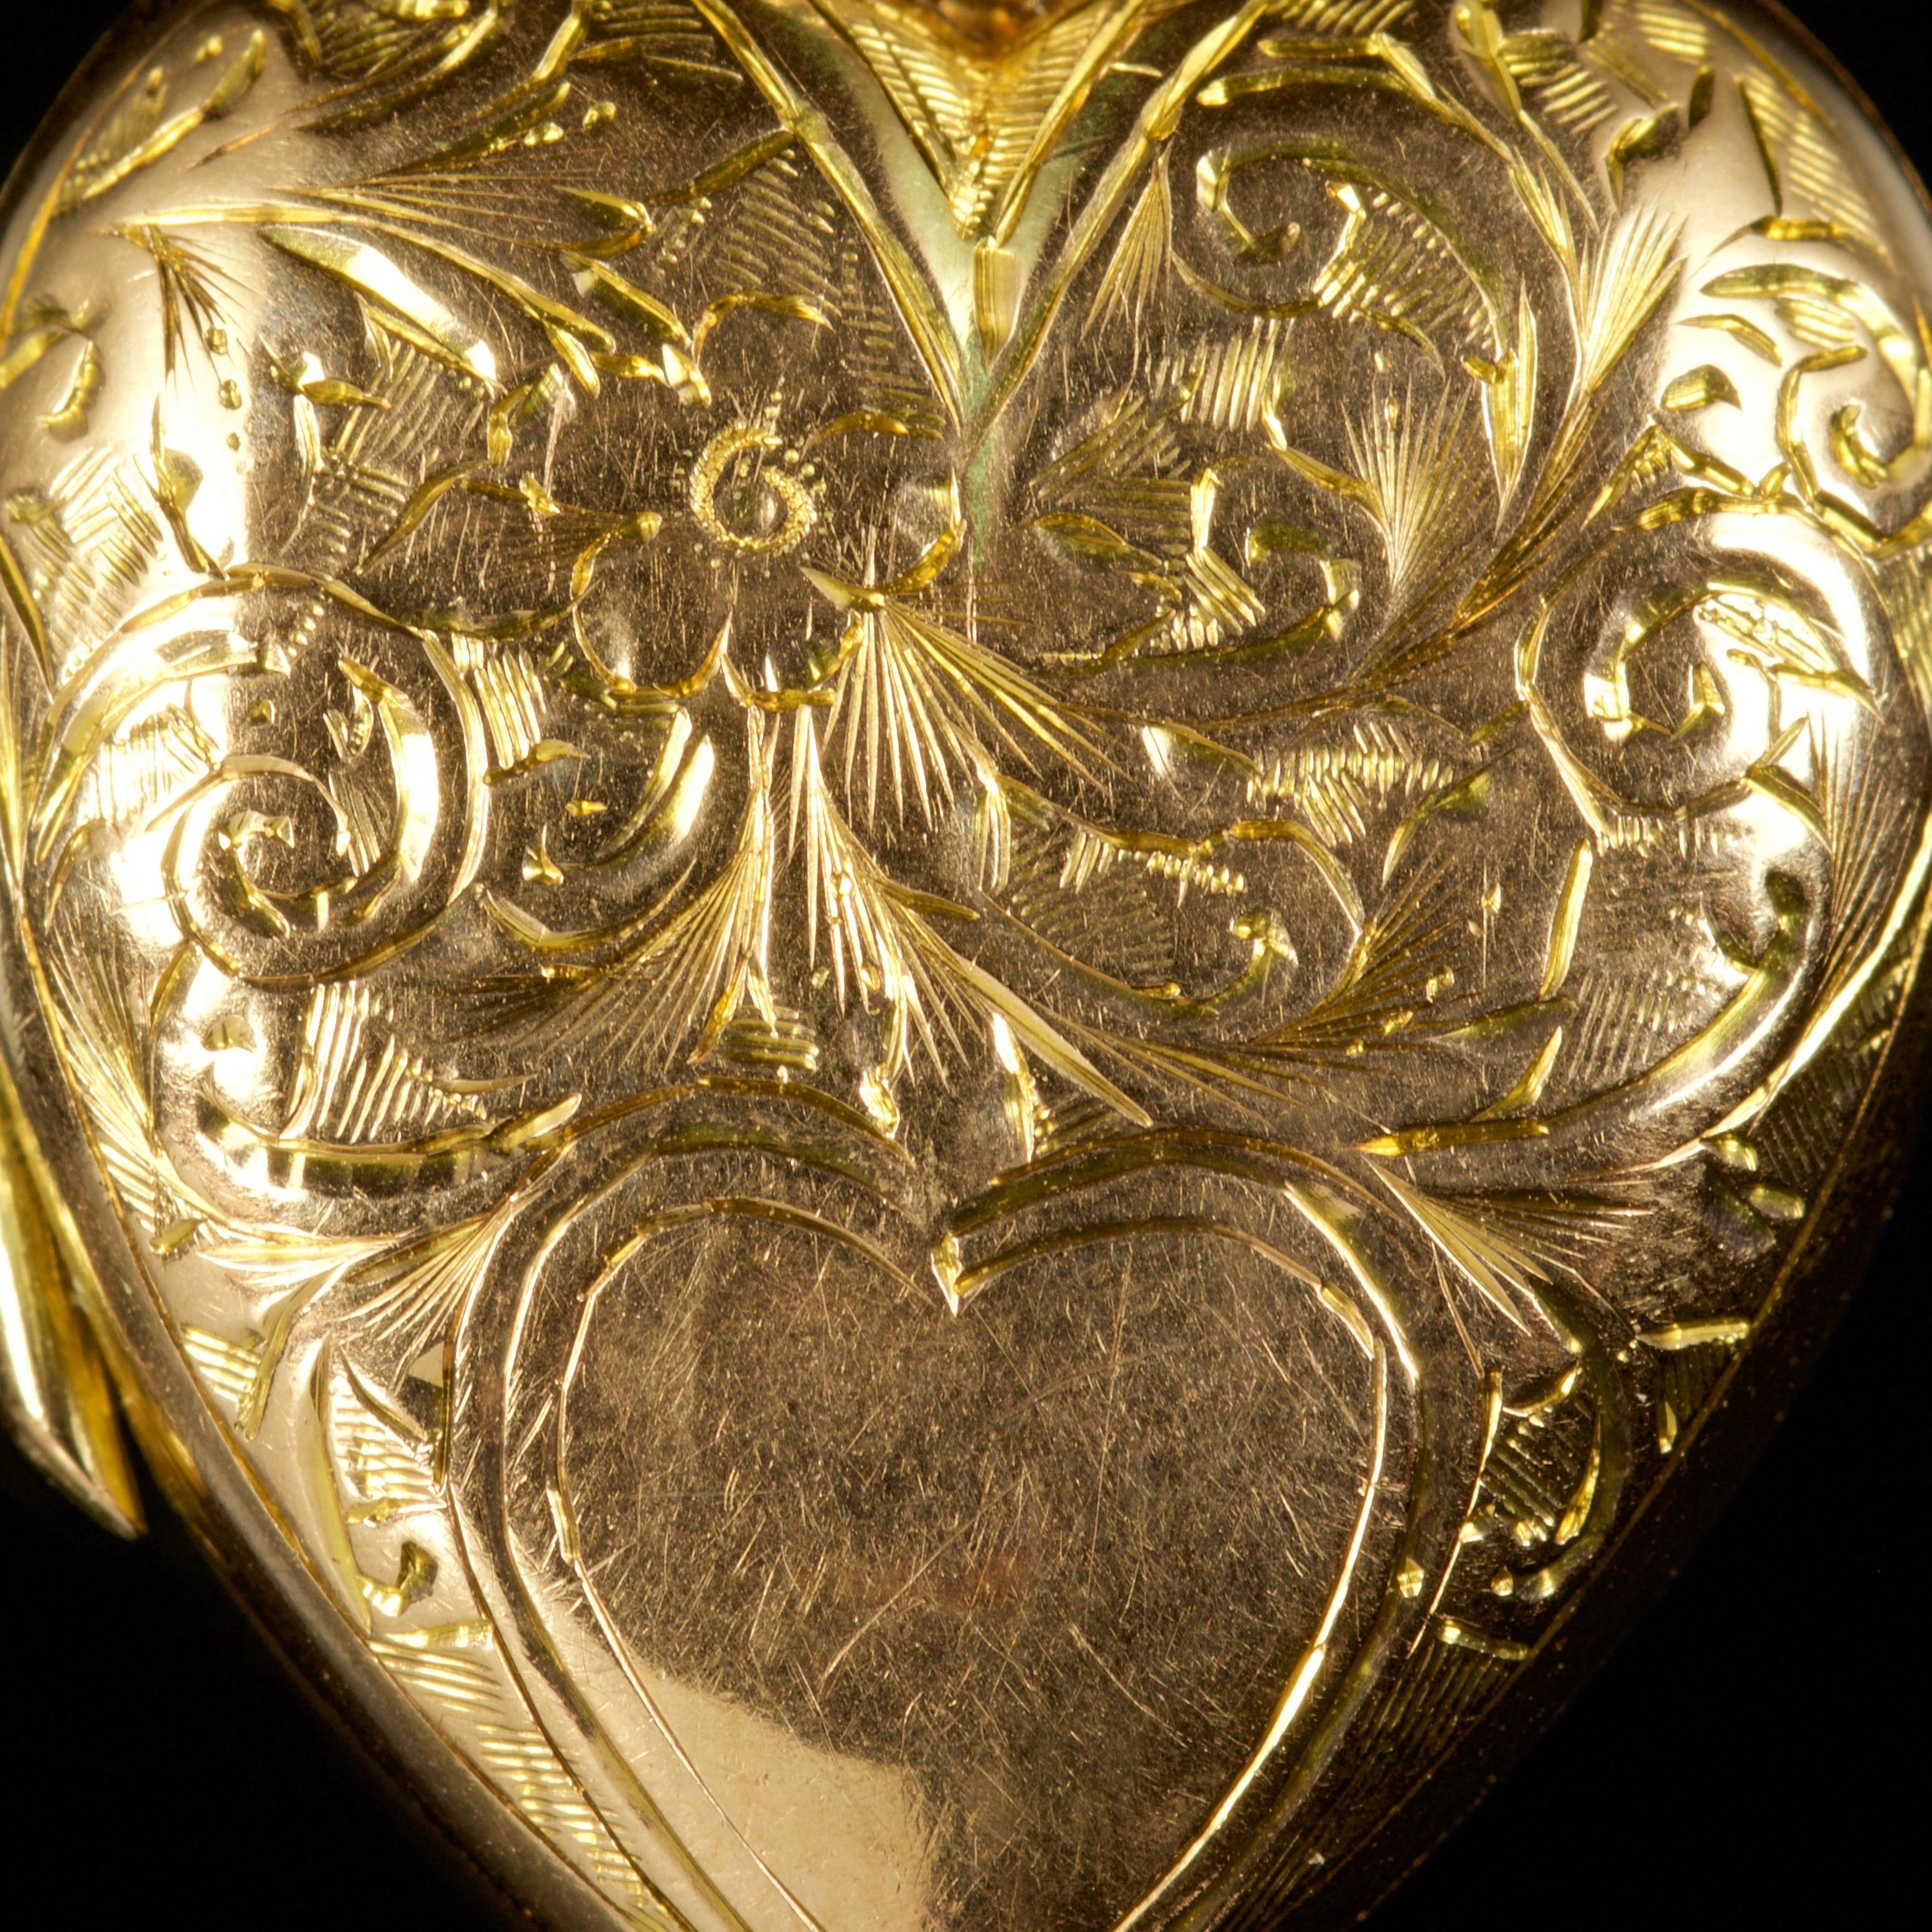 This fabulous Edwardian heart locket is set in 9ct Gold, dated 1904.

The front and back of the locket is beautifully engraved, showing fabulous craftsmanship of it’s time.

The locket will hold two images so you can add your own history. 

On the